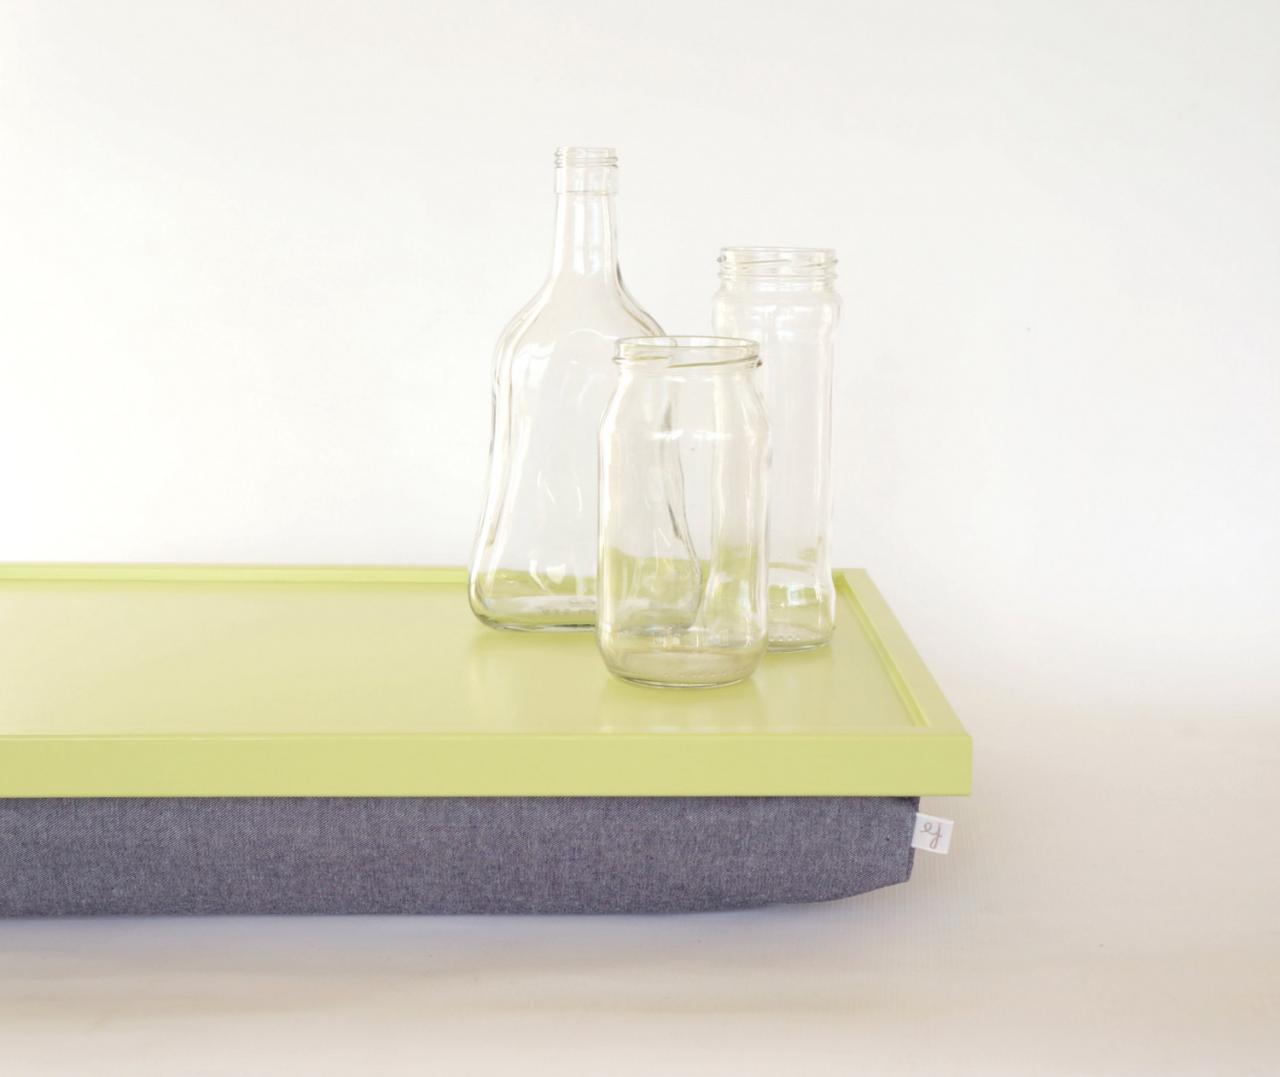 Denim Support Pillow With Tray, Laptop Lap Desk Or Breakfast Serving Tray - Light Green With Denim Cushion